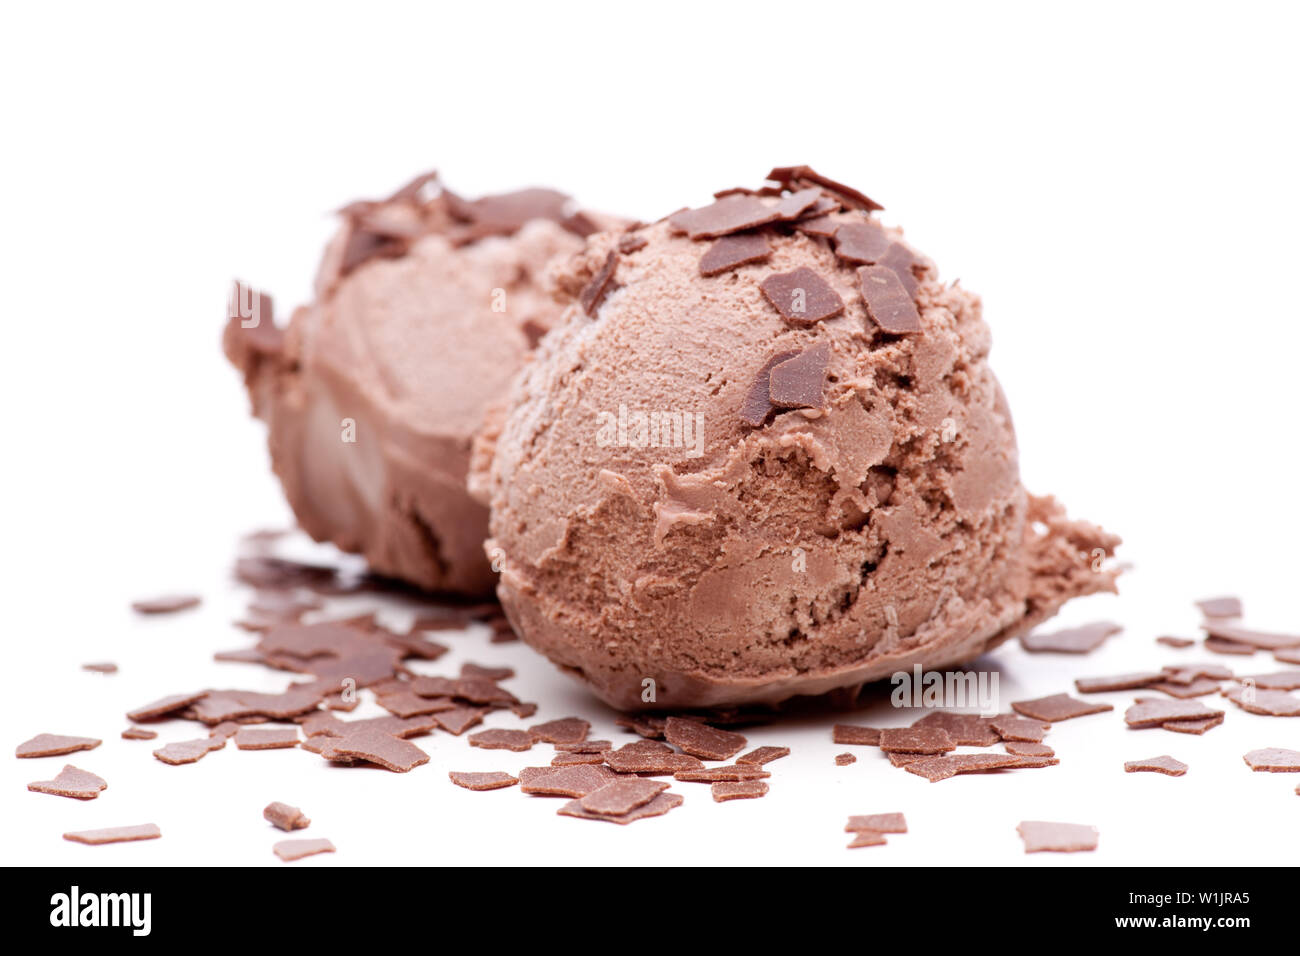 Two scoops of chocolate ice cream decorated with chocolate chips Stock Photo